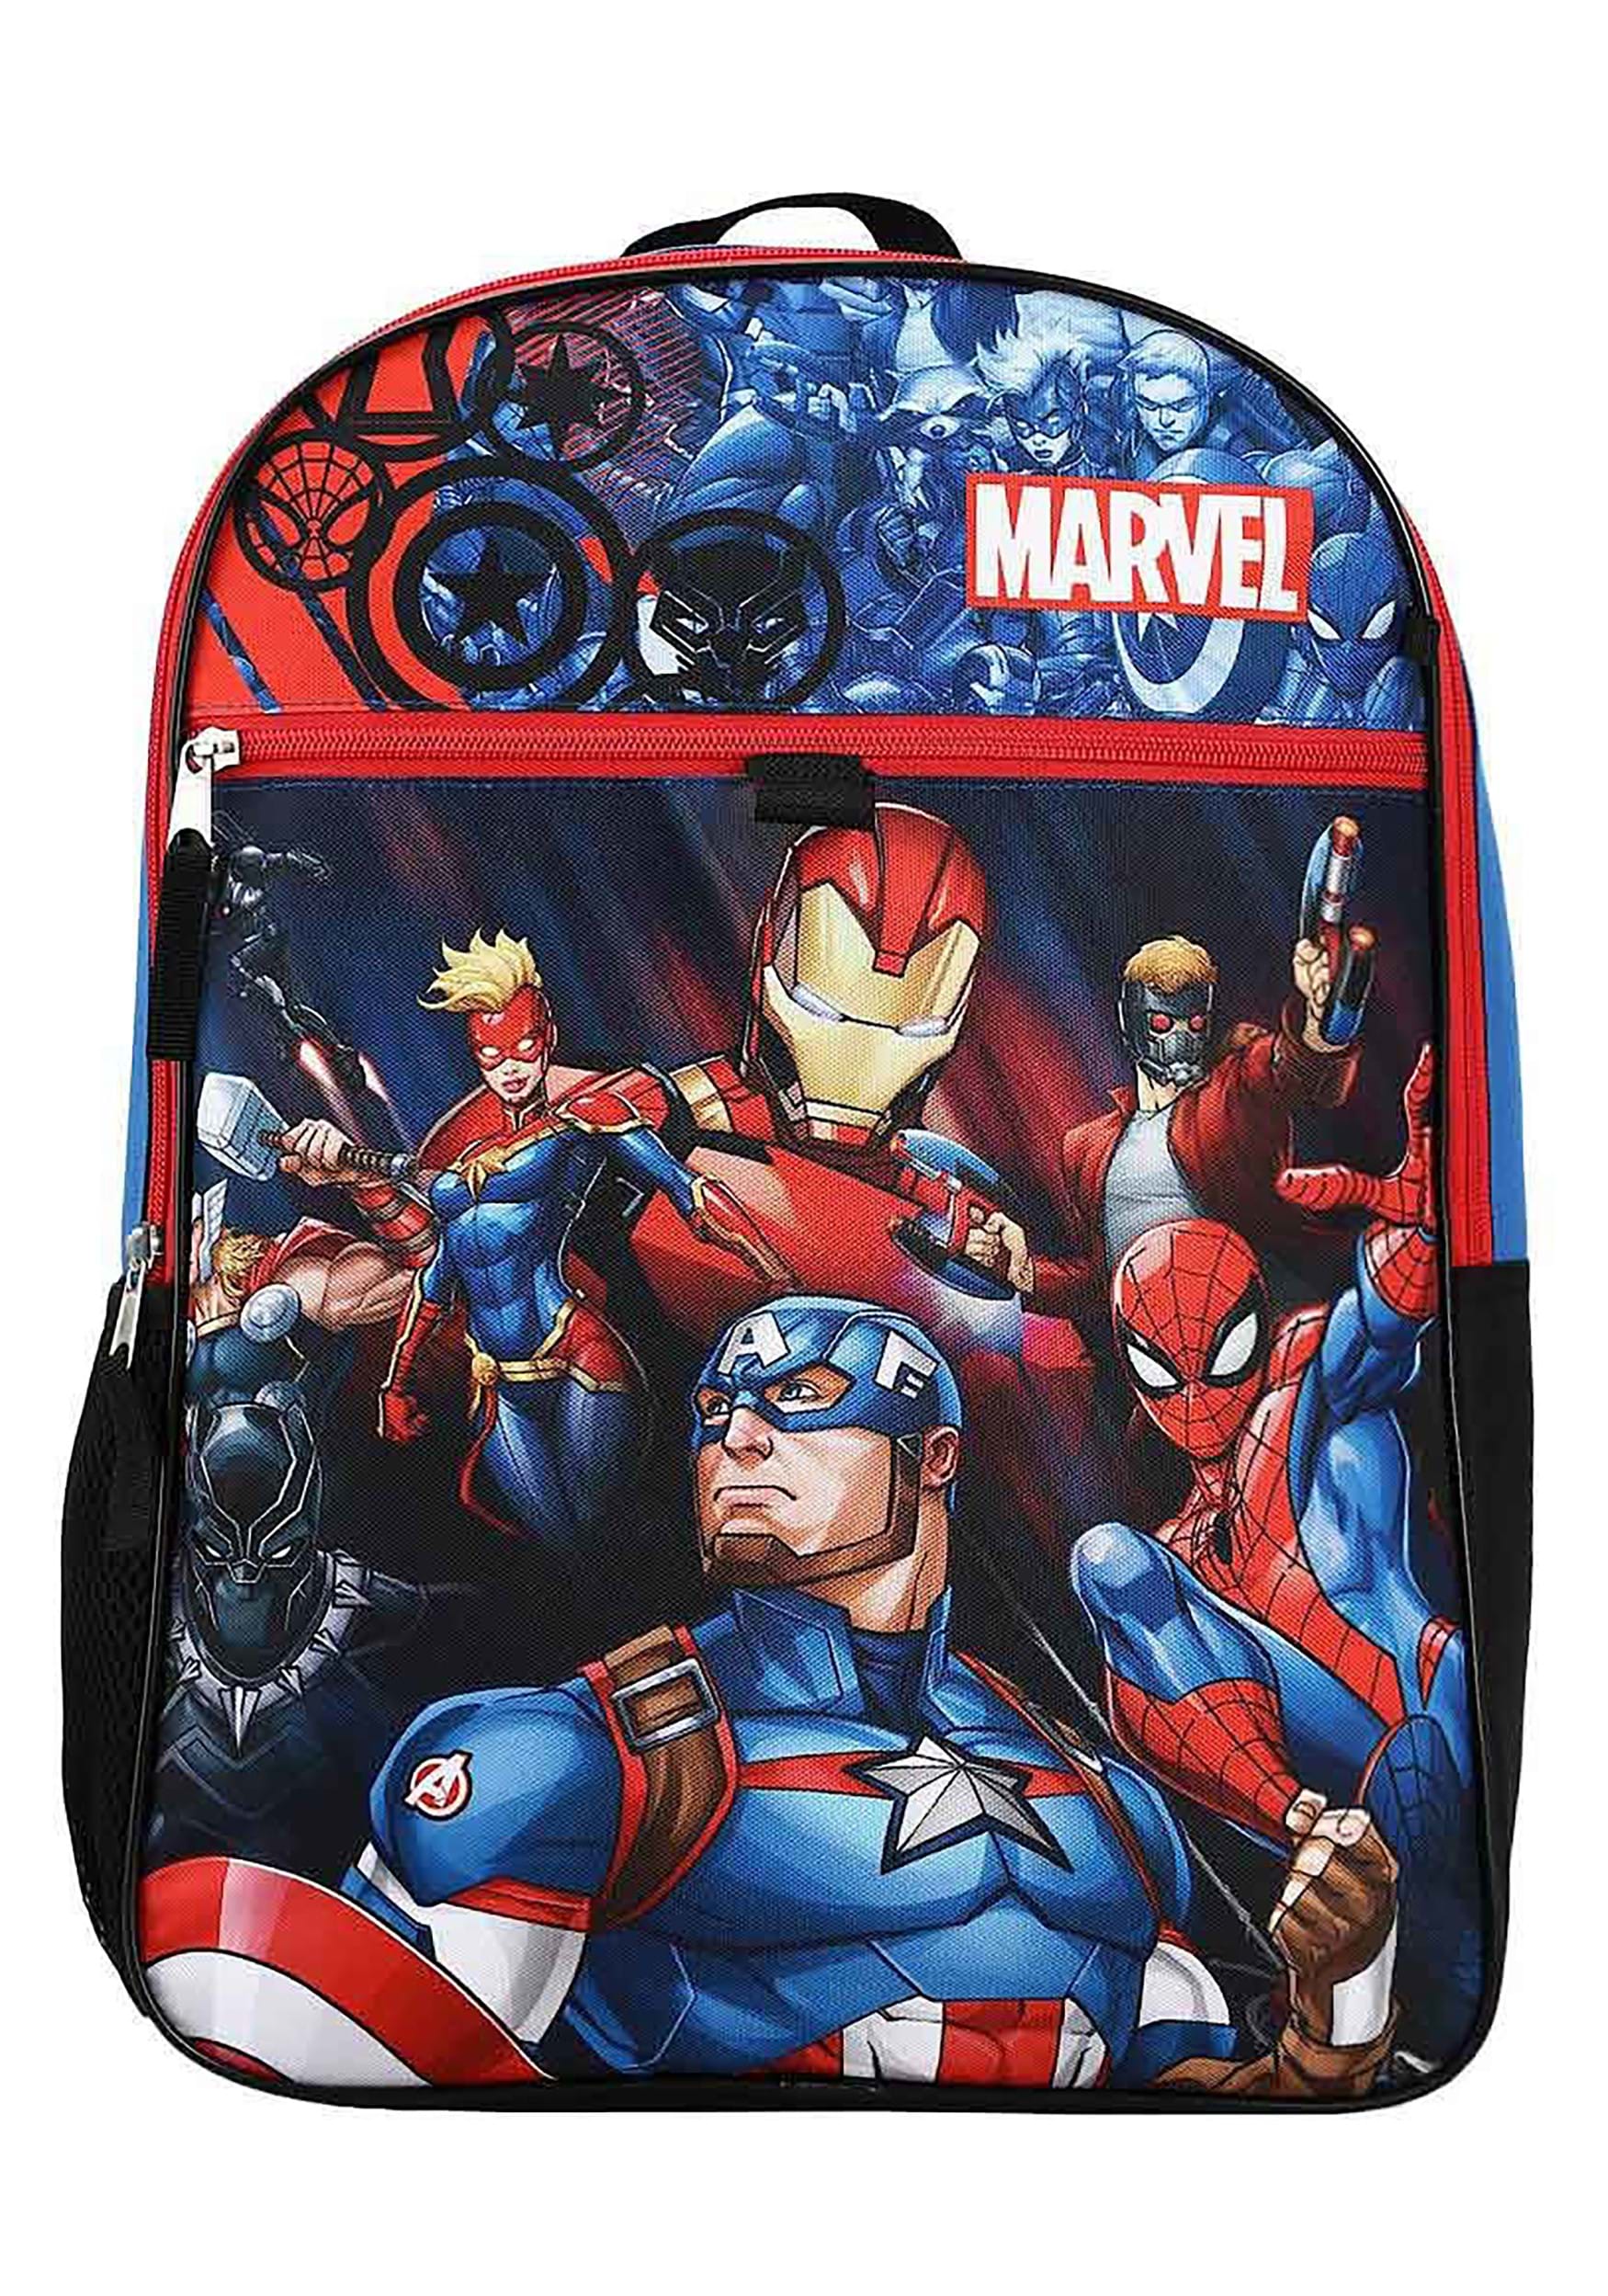 Marvel Spiderman 16 Backpack with Lunch Bag and Water Bottle